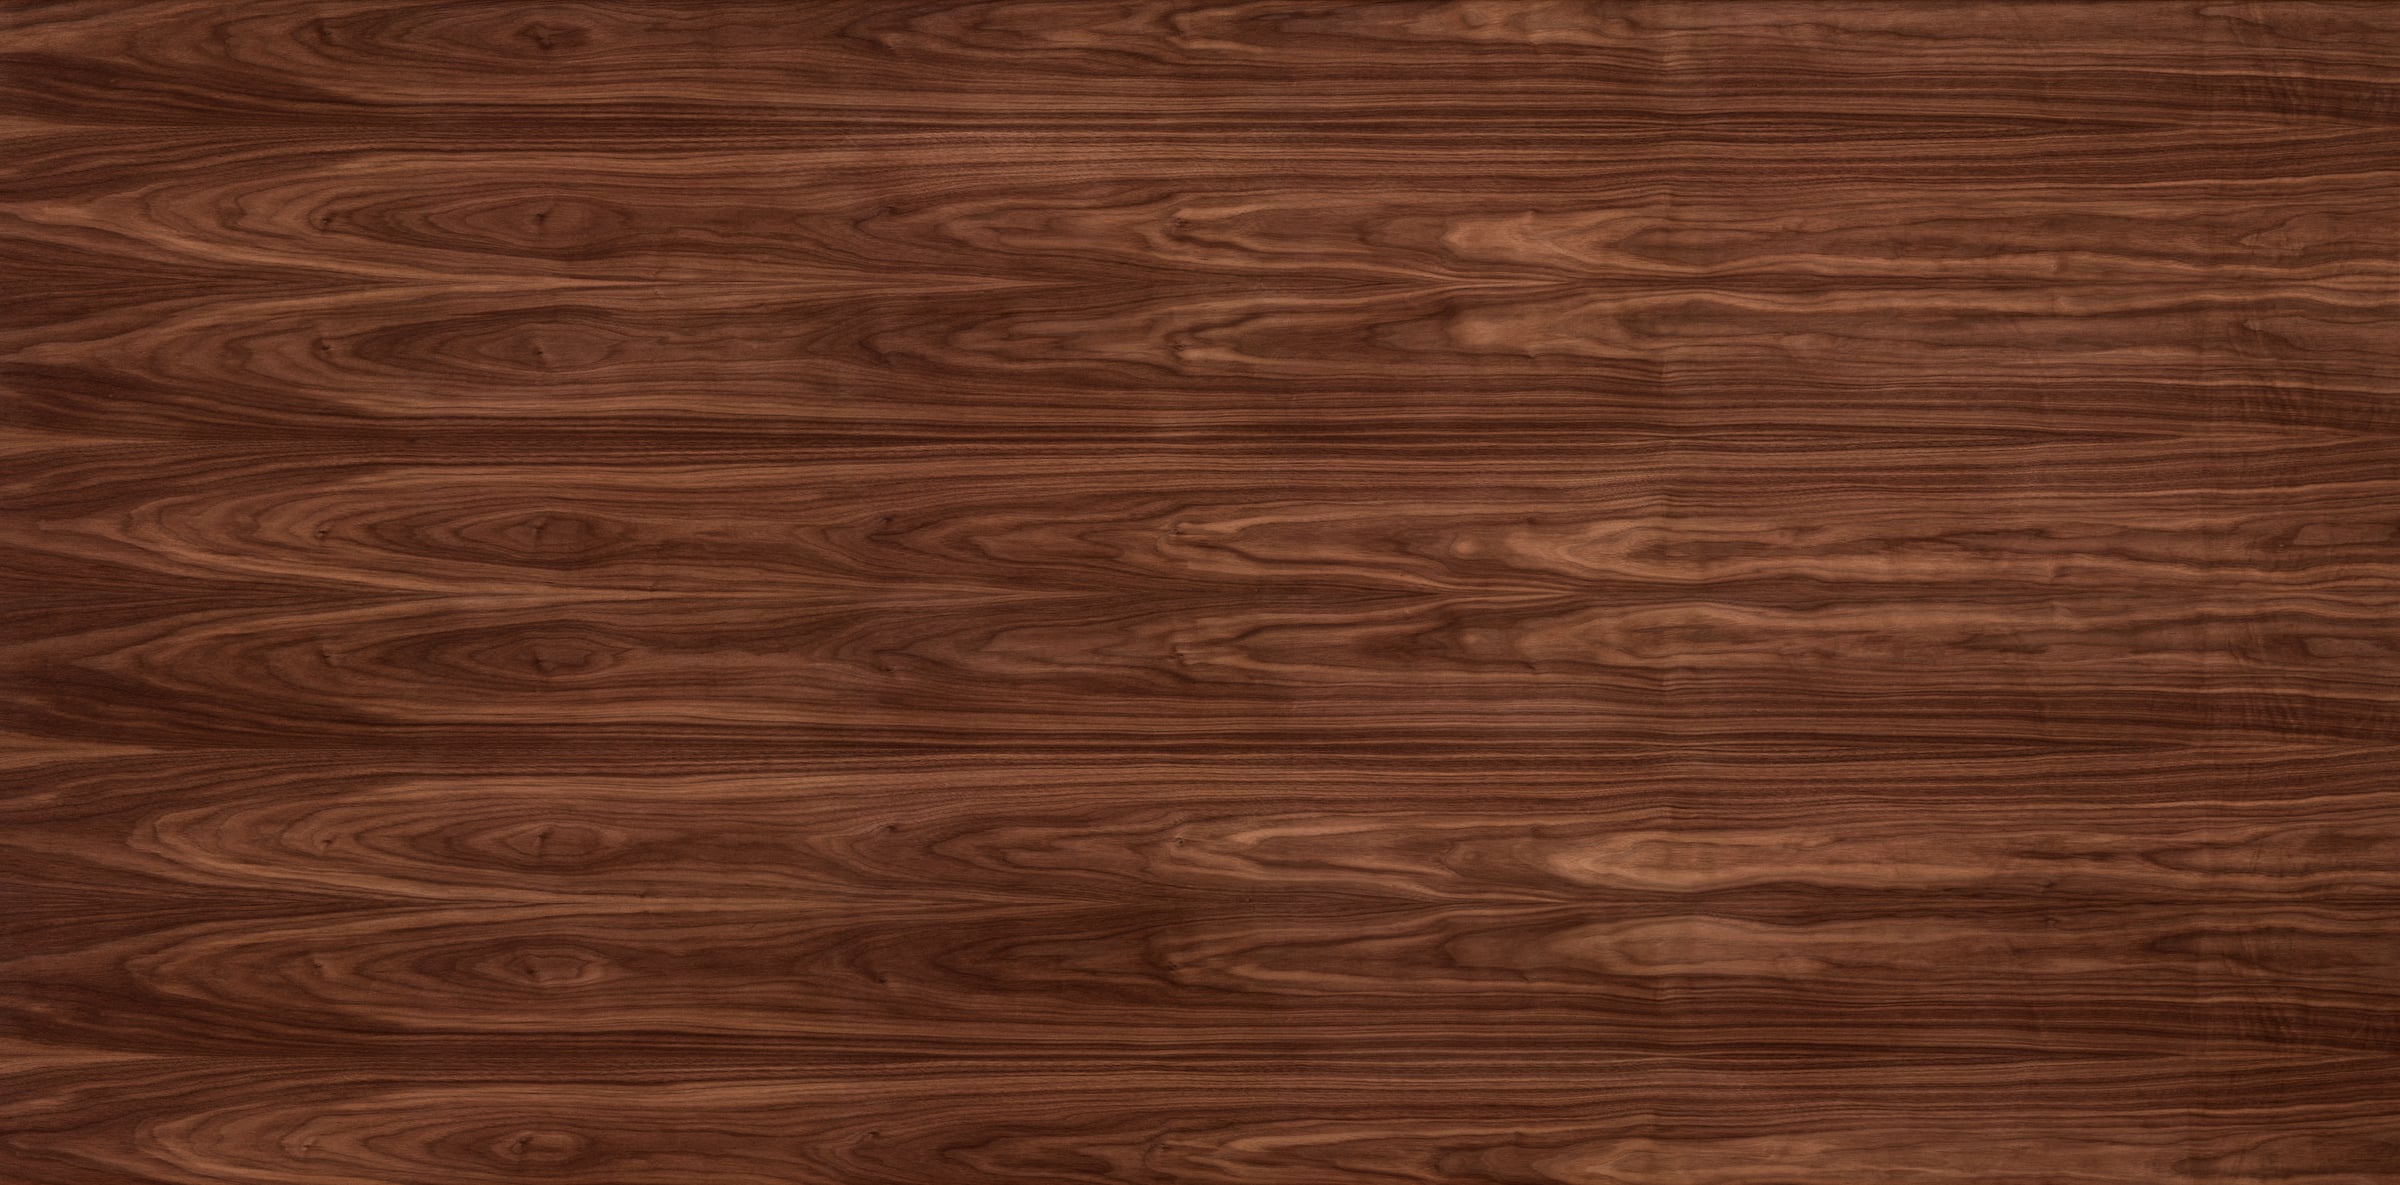 1,912 megapixels! An ultra-high-resolution texture photo file of oiled american black walnut; gigapixel photograph created by David Lineton.